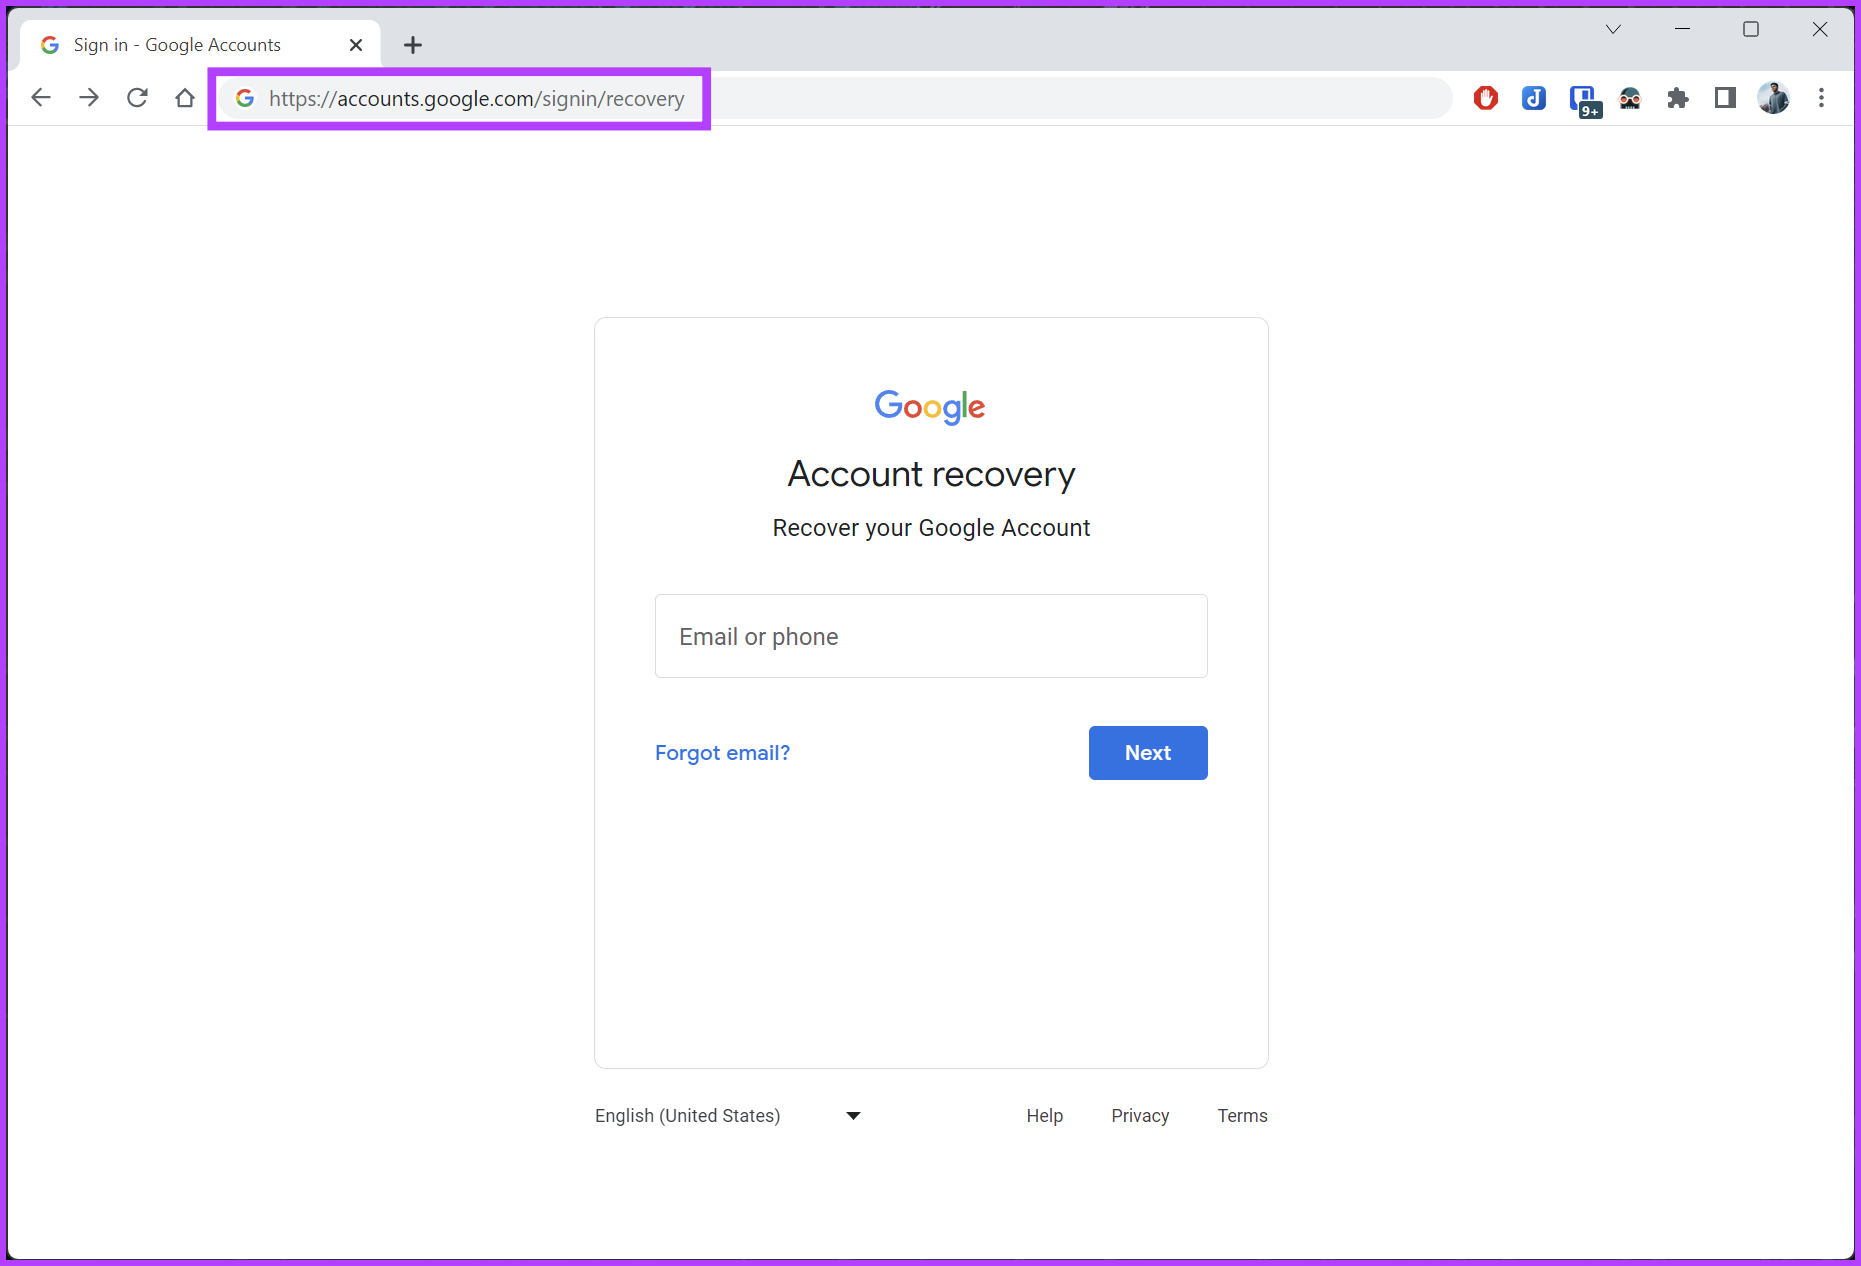 Visit the Google Account recovery page